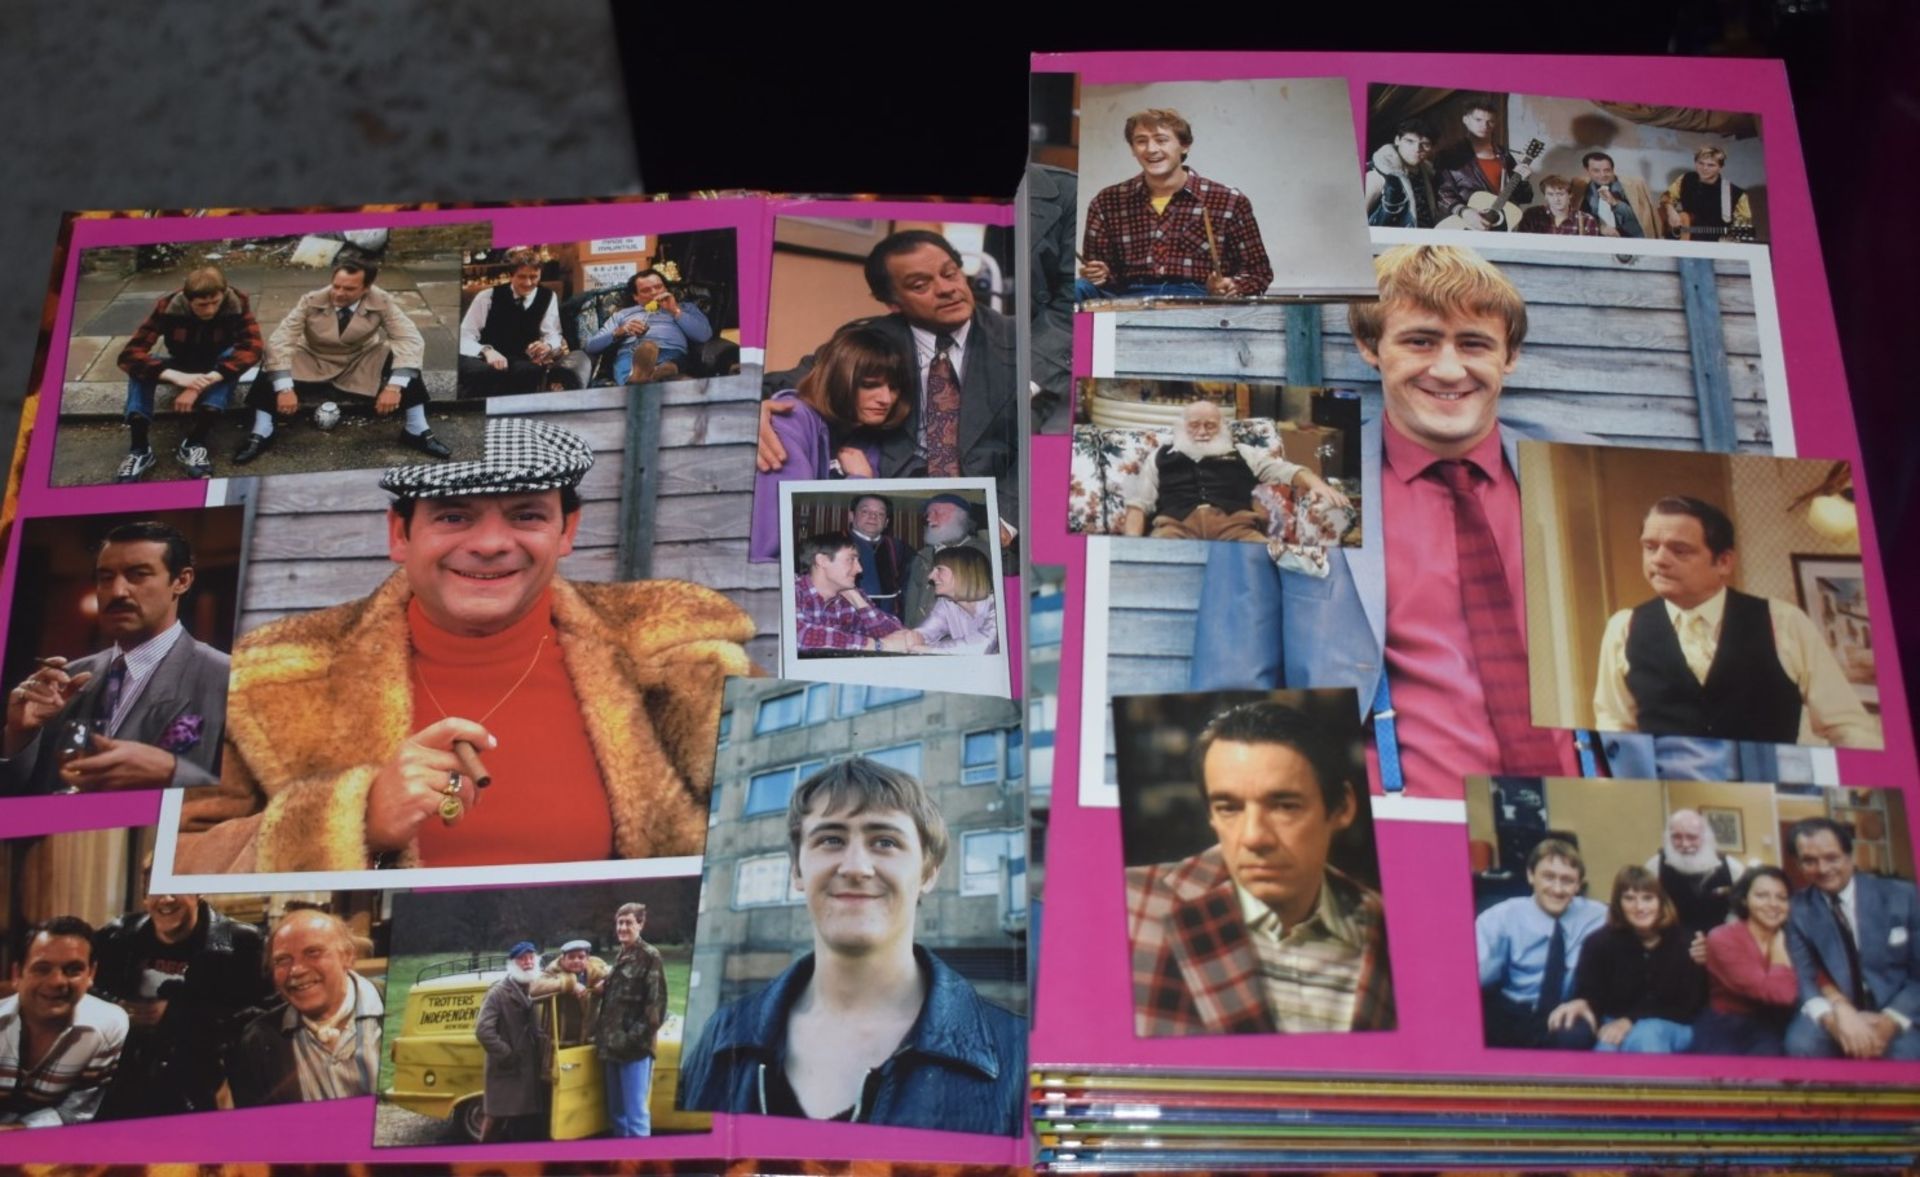 1 x Only Fools and Horses DVD Box Set - Includes 25 Discs Full of Only Fools and Horses Classics - - Image 3 of 4